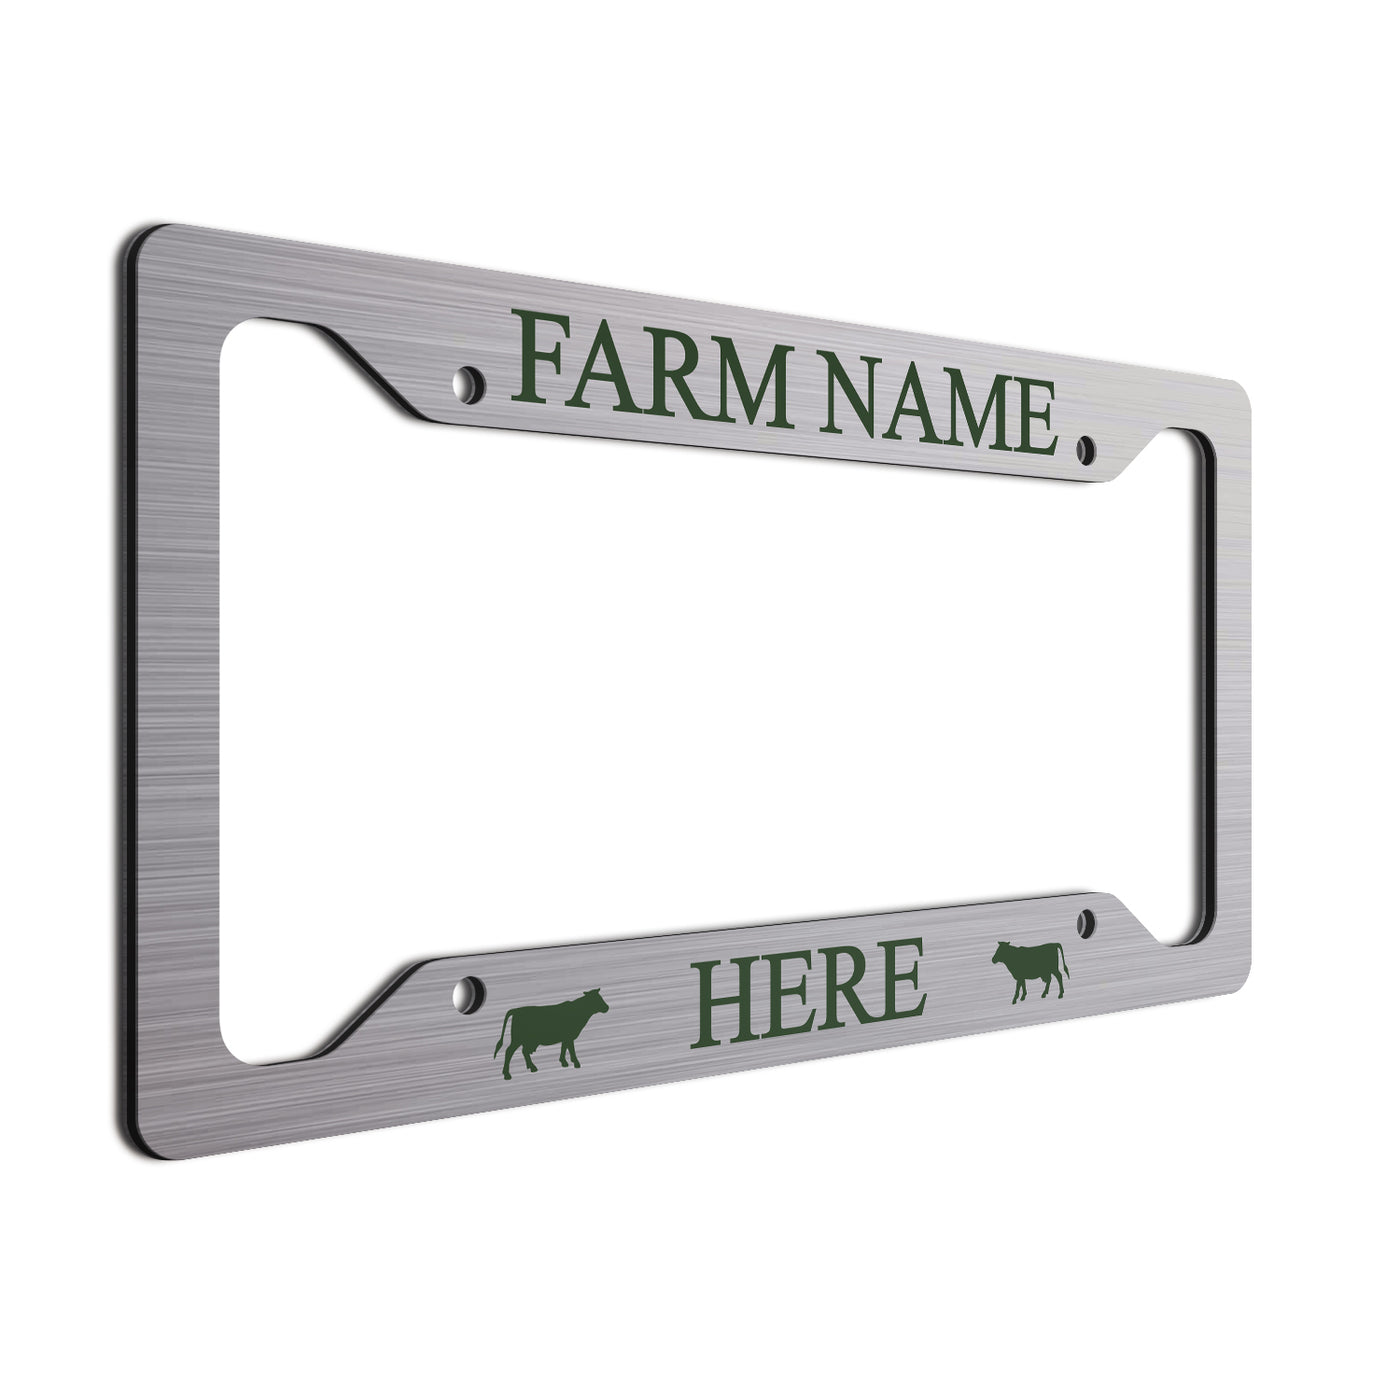 Dark Green Cows and font on brushed finish